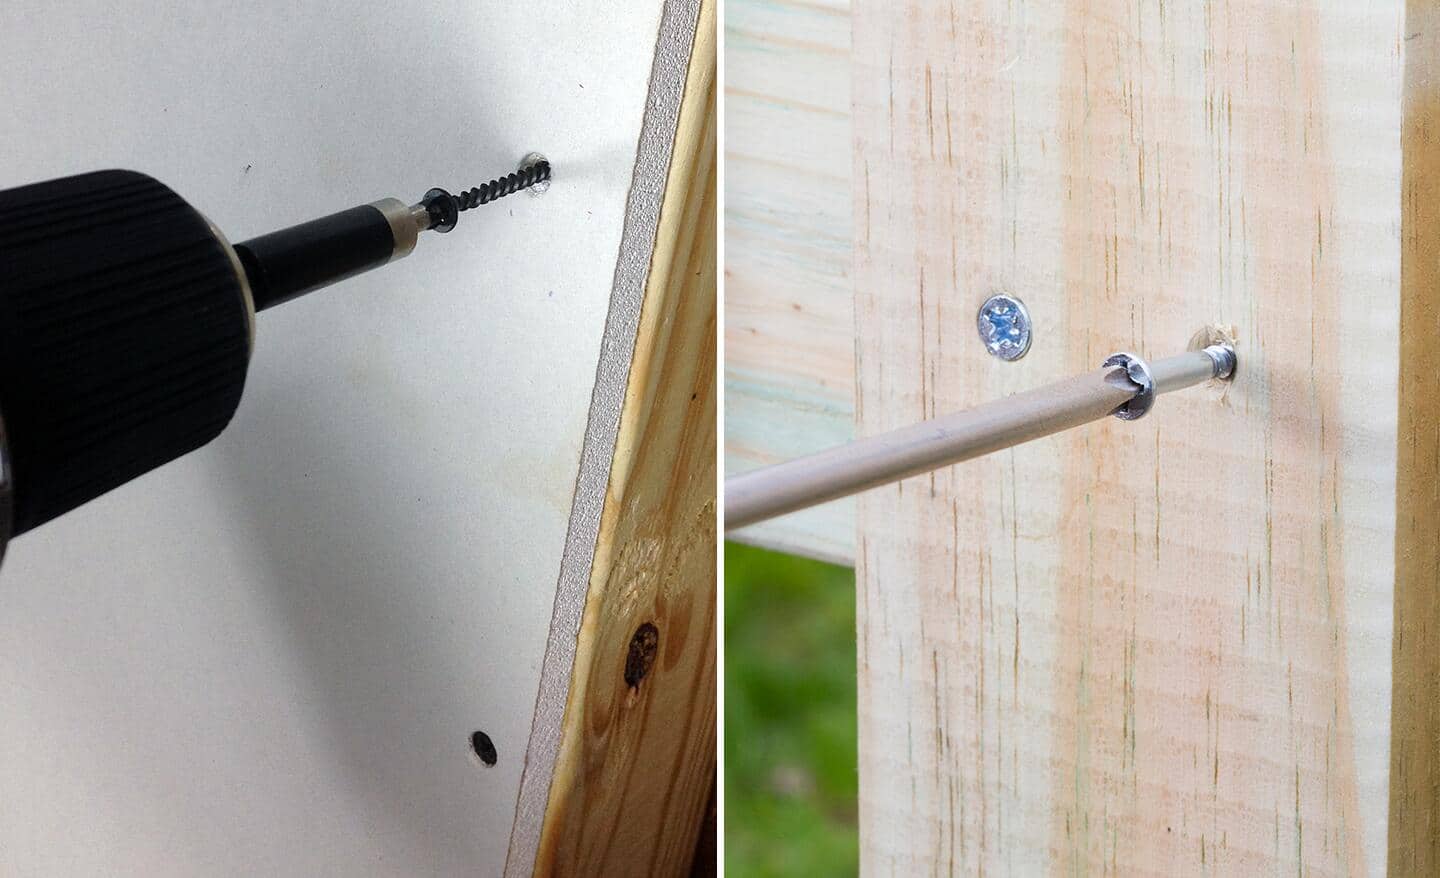 A wood screw being screwed into wood on the right and a drywall screw being drilled into drywall on the left.